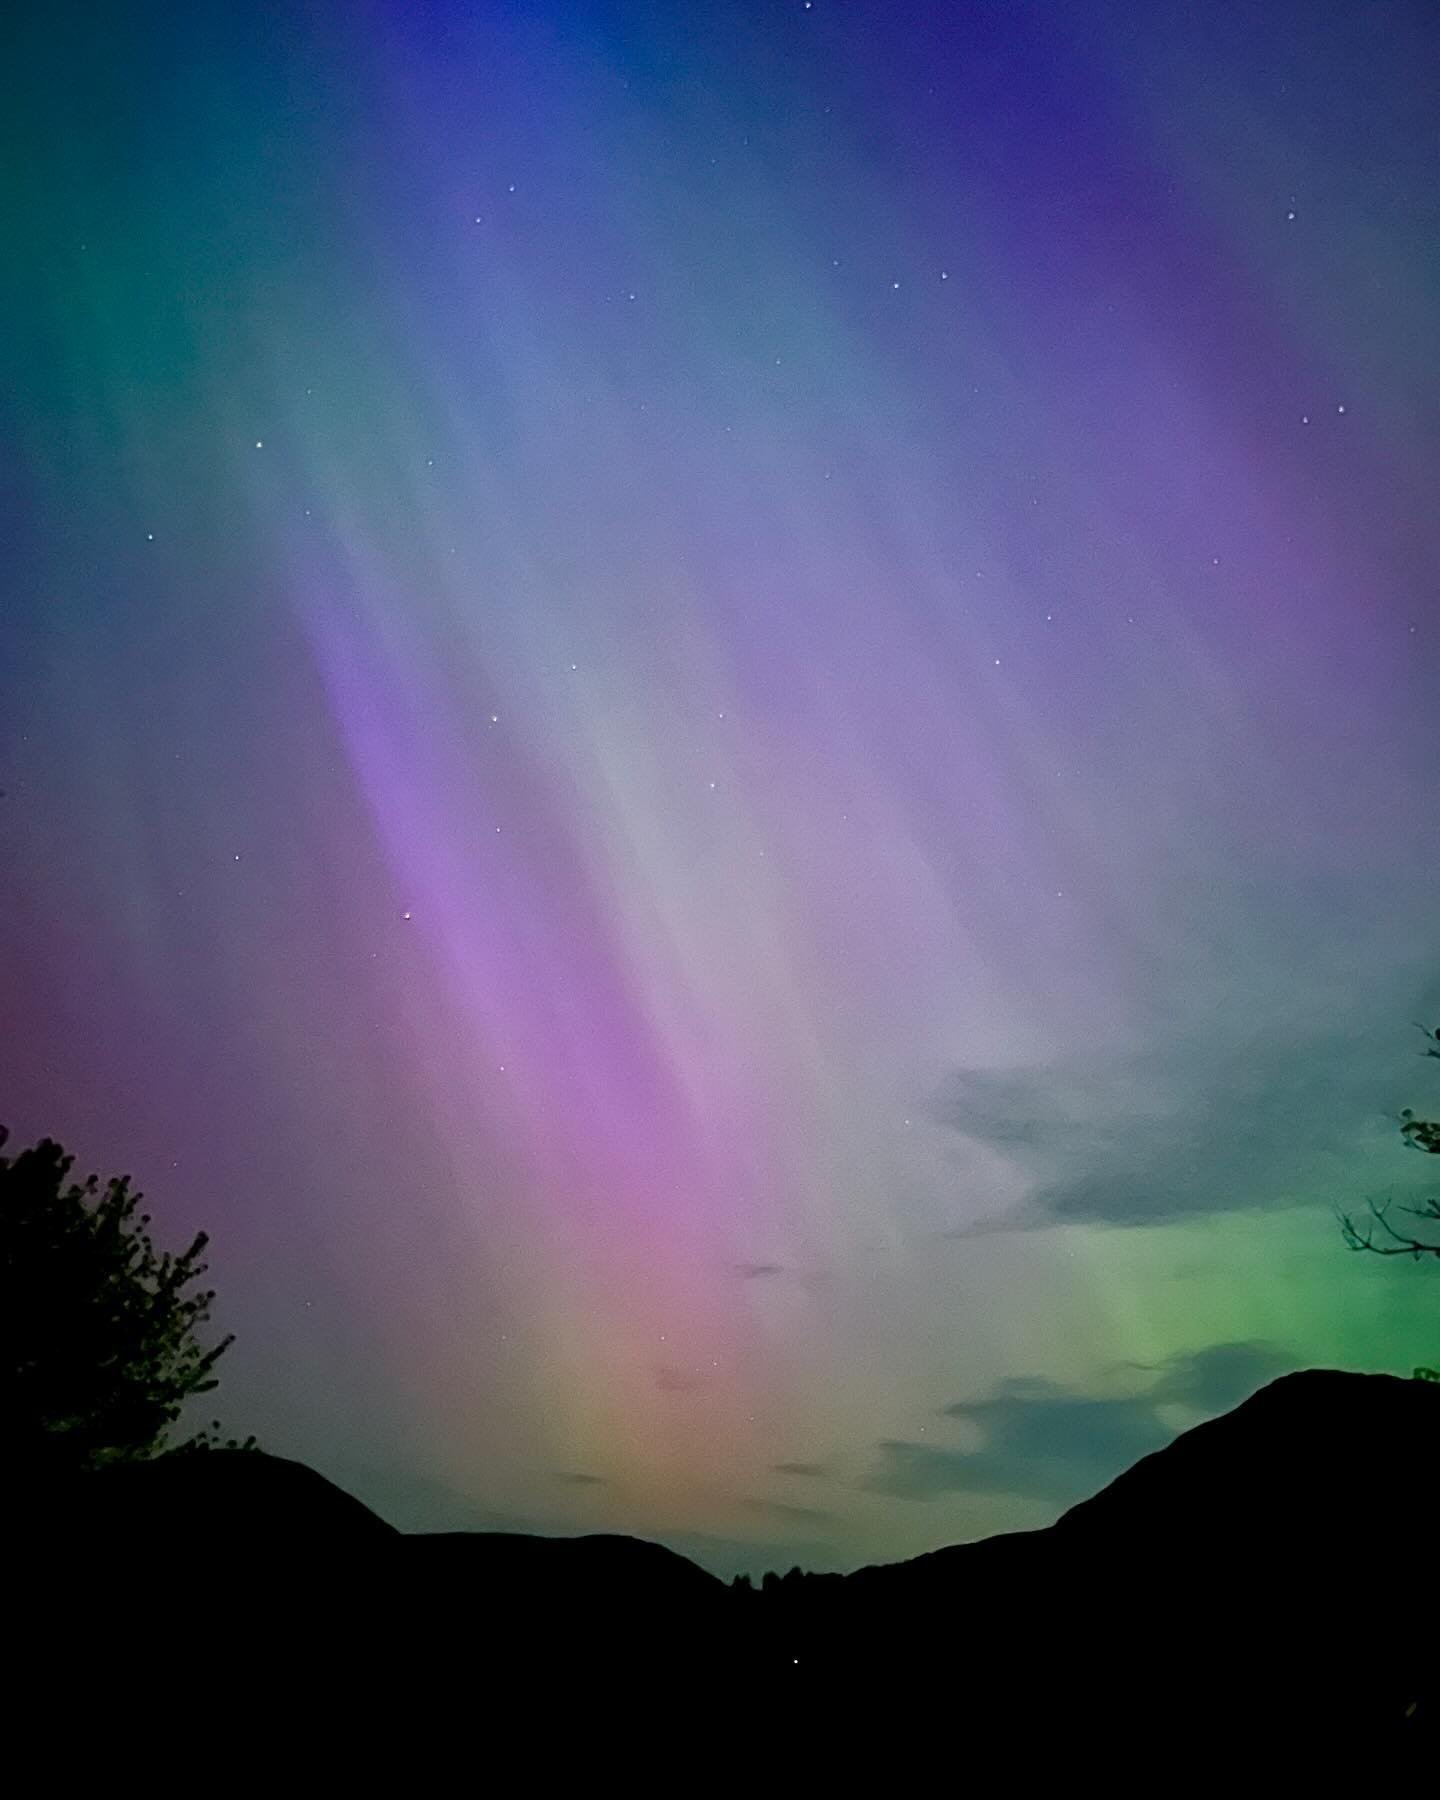 🌌The Aurora Borealis, sometimes known as the Northern Lights
 
BUT! DID YOU KNOW&hellip;?
 
🏹Aurora is the Roman goddess of Dawn, and Boreas is the Greek term for the North Wind. 
🌌No two light displays are the same, the colour and patterns always